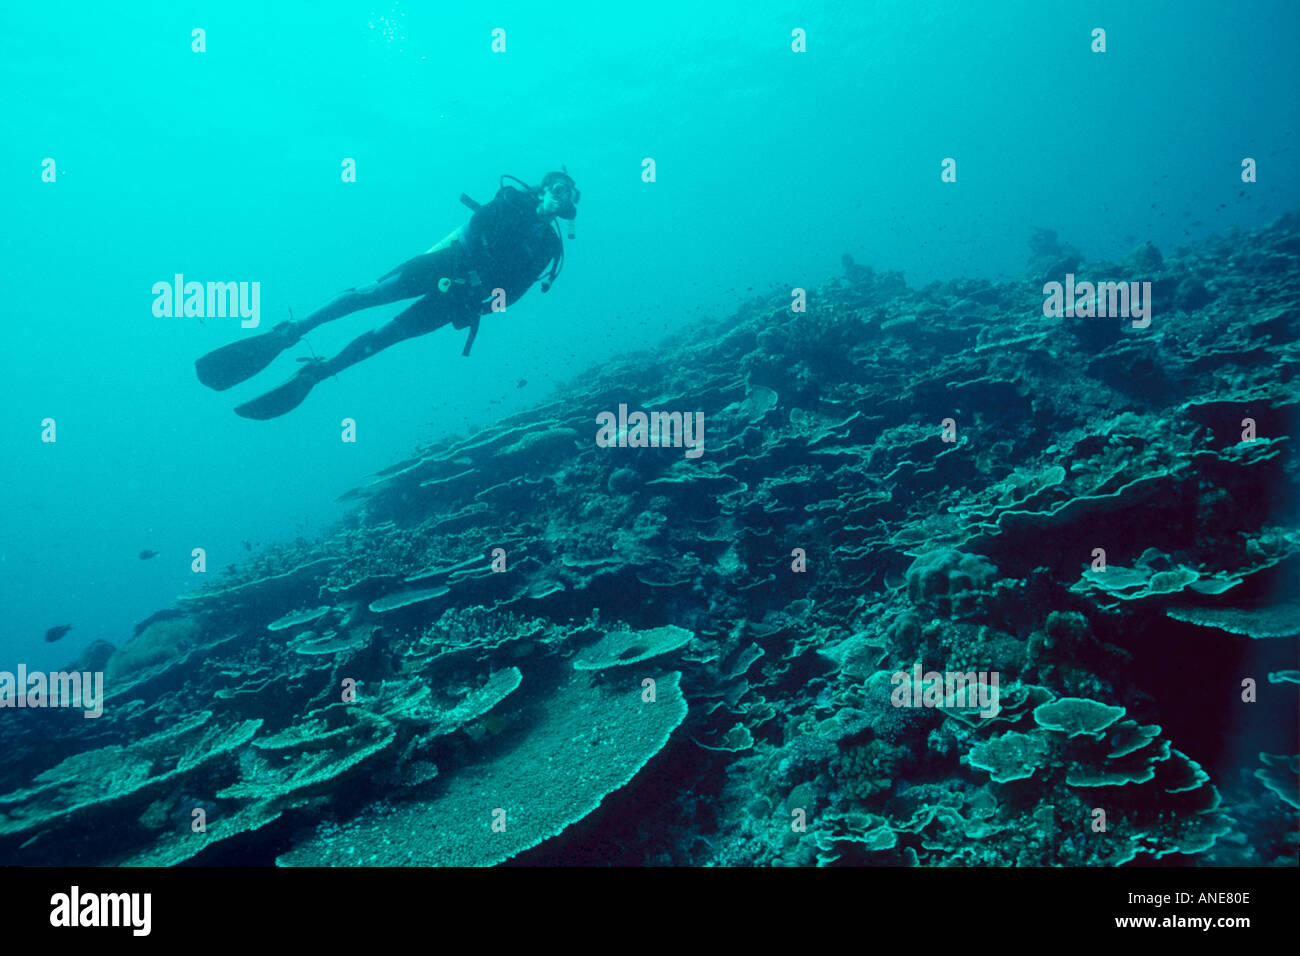 Diver silhouette and coral drop off Kranket Wall Madang Papua New Guinea South Pacific Stock Photo